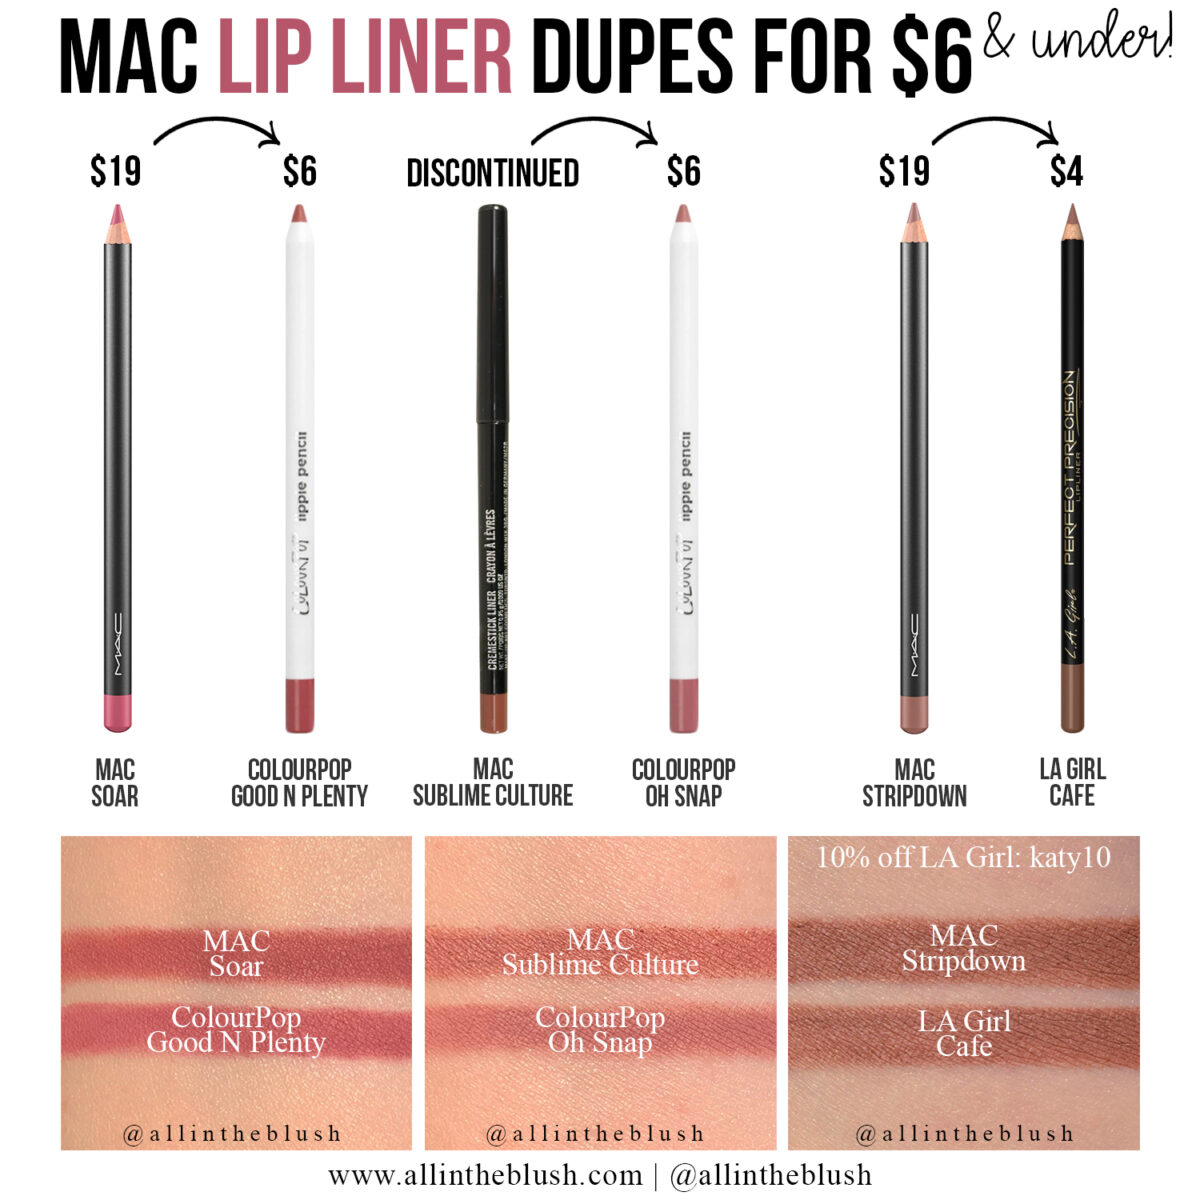 MAC Lip Liners Dupes for $6 & Under!